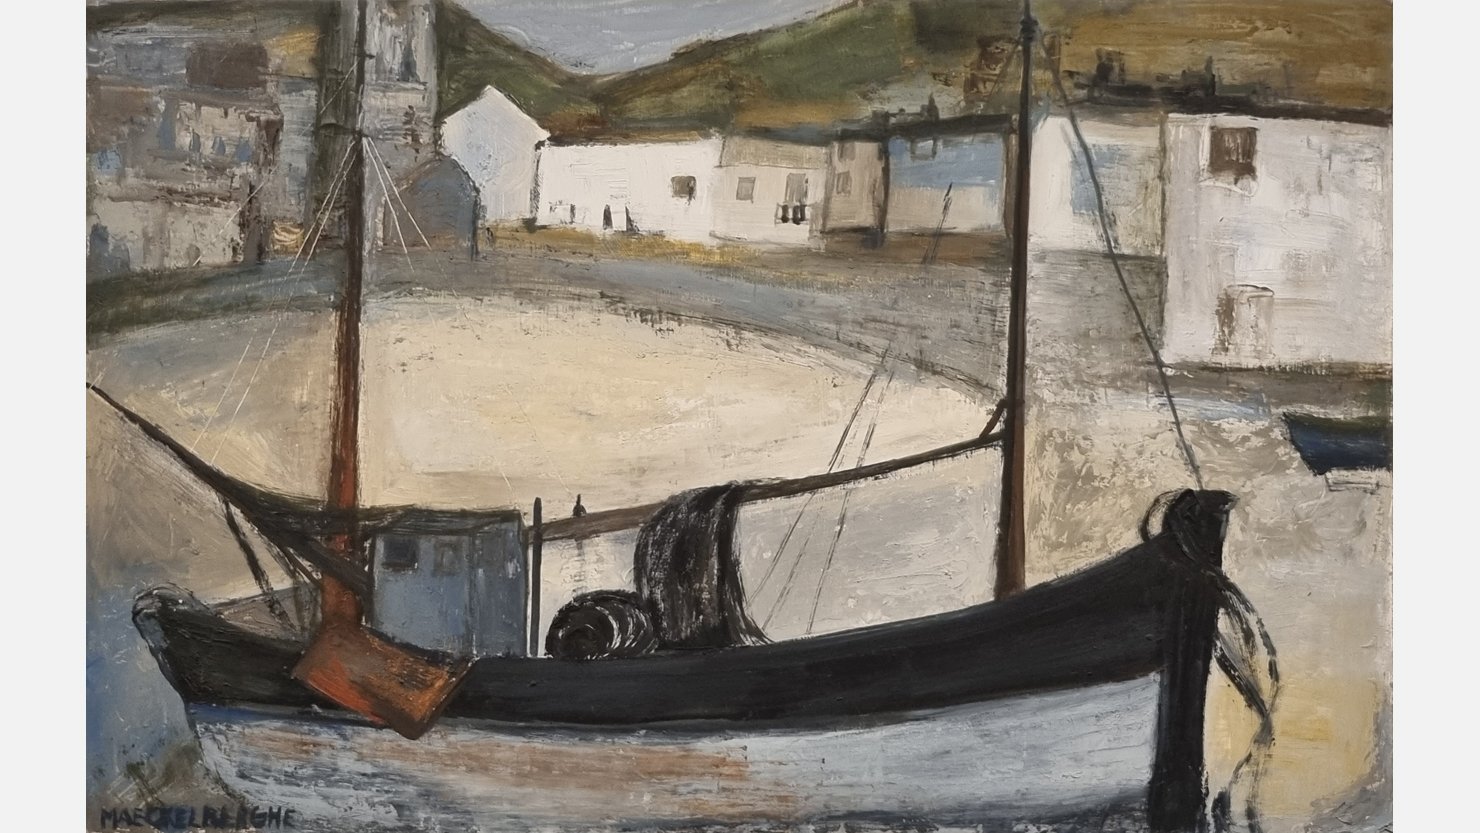 'Fishing Boat, St Ives' by Margo Maeckelberghe. Courtesy of The Box, Plymouth.